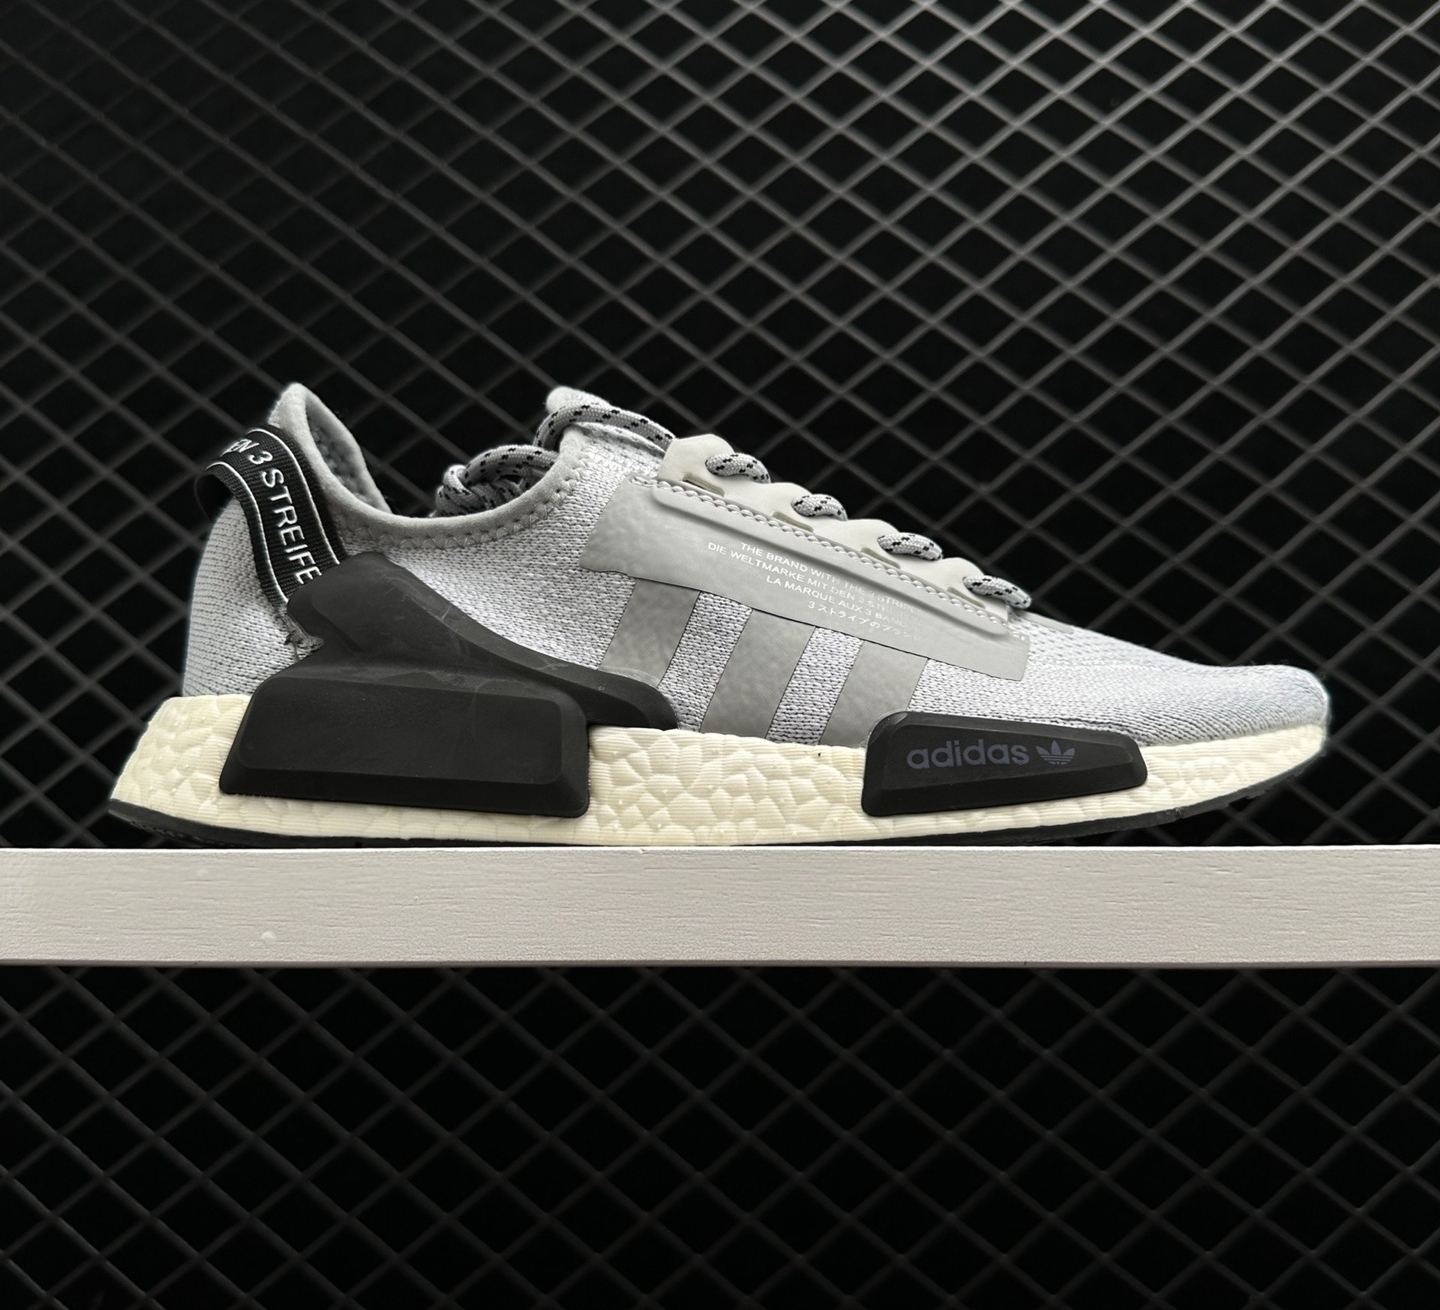 Adidas NMD_R1 V2 Gray Black - Stylish and Comfortable Sneakers for Men